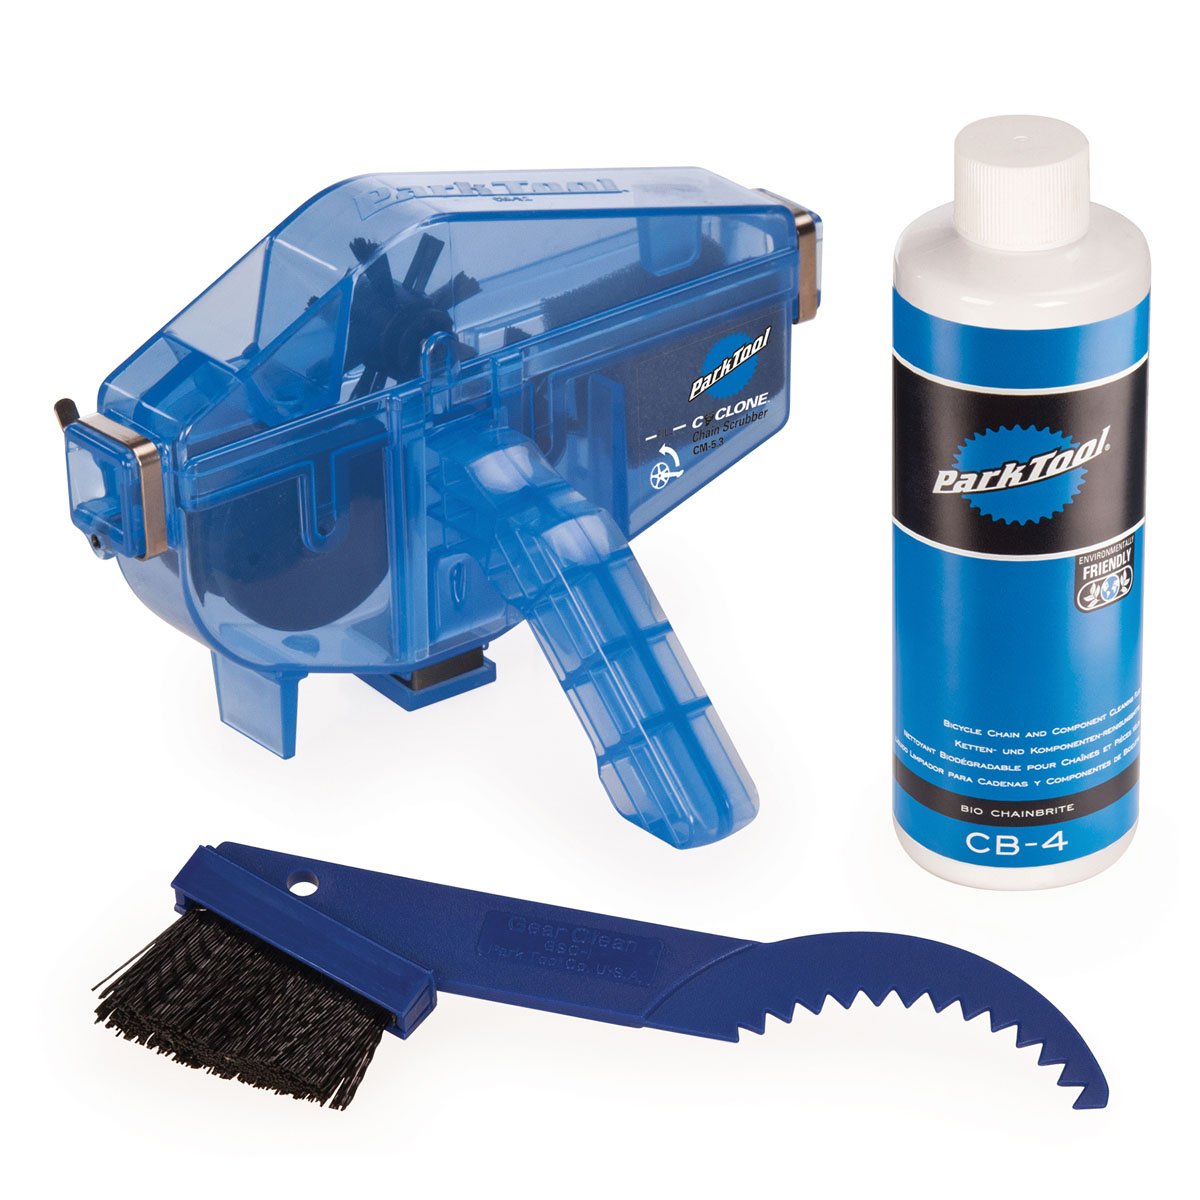 Park Tool CG-2.4 Cleaning Kit